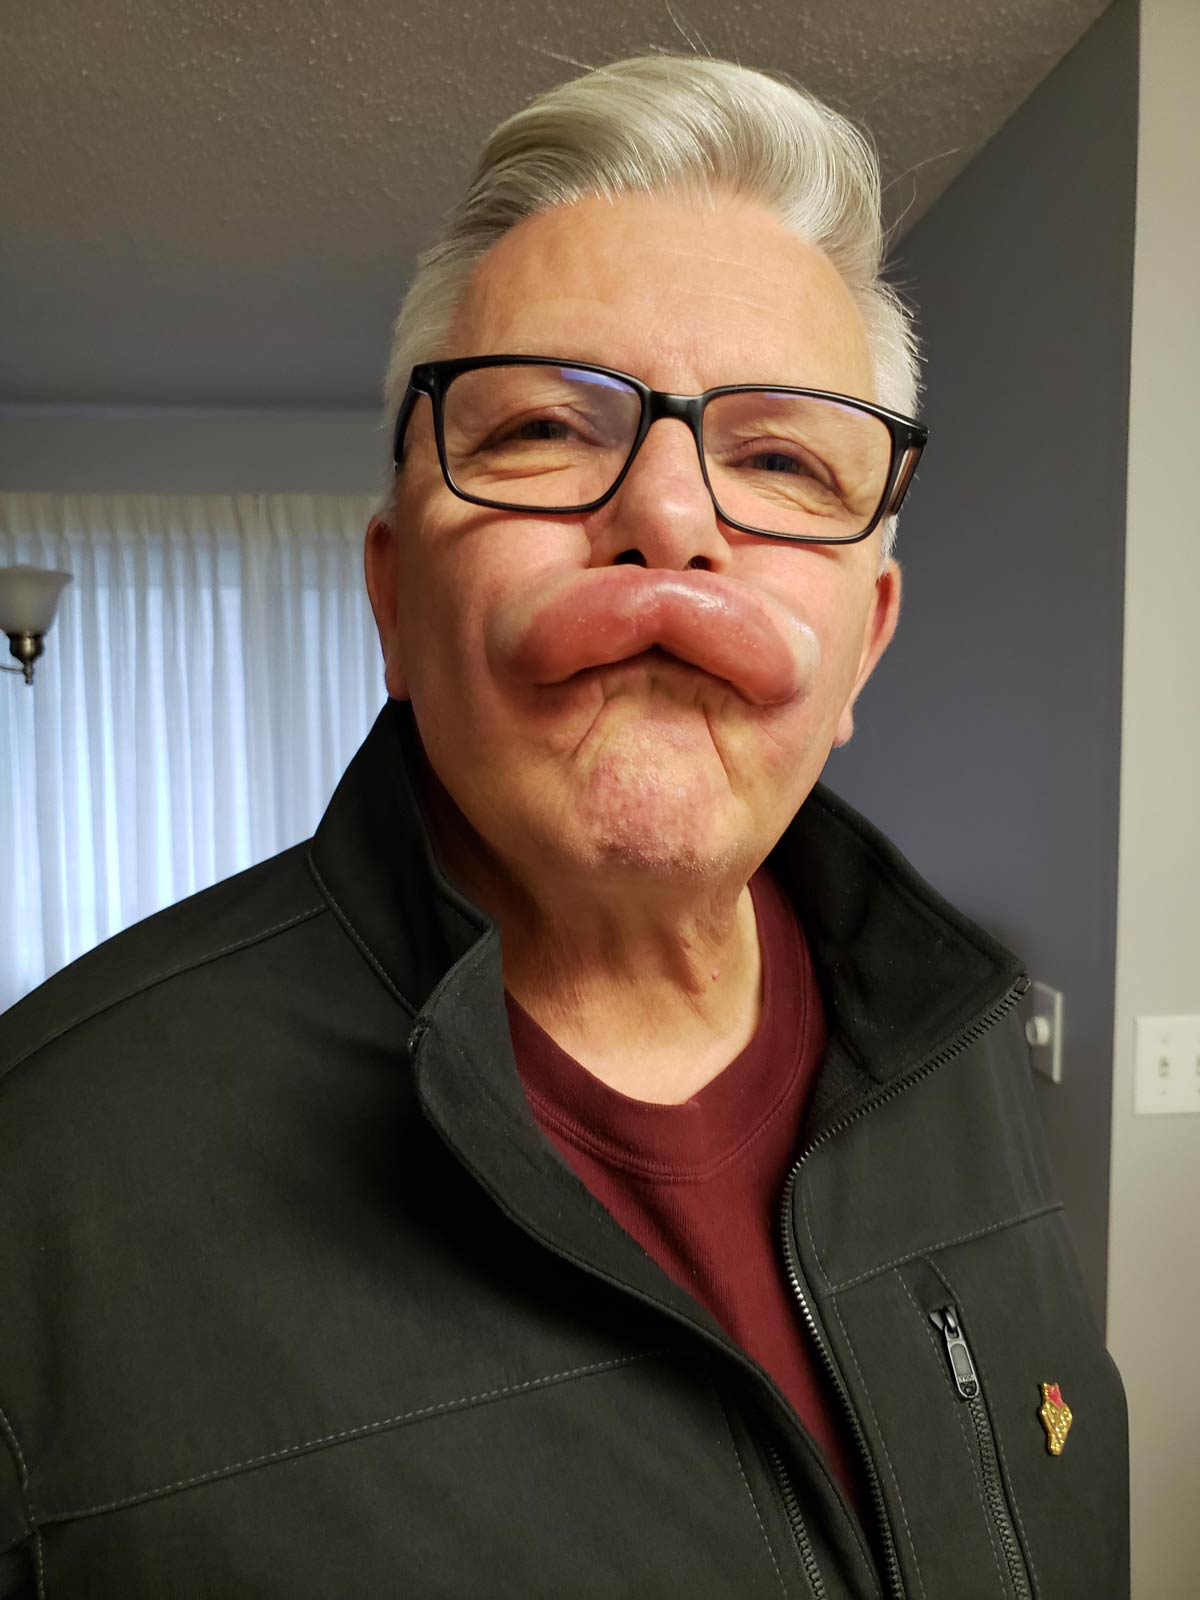 My dad had a small reaction after his root canal today